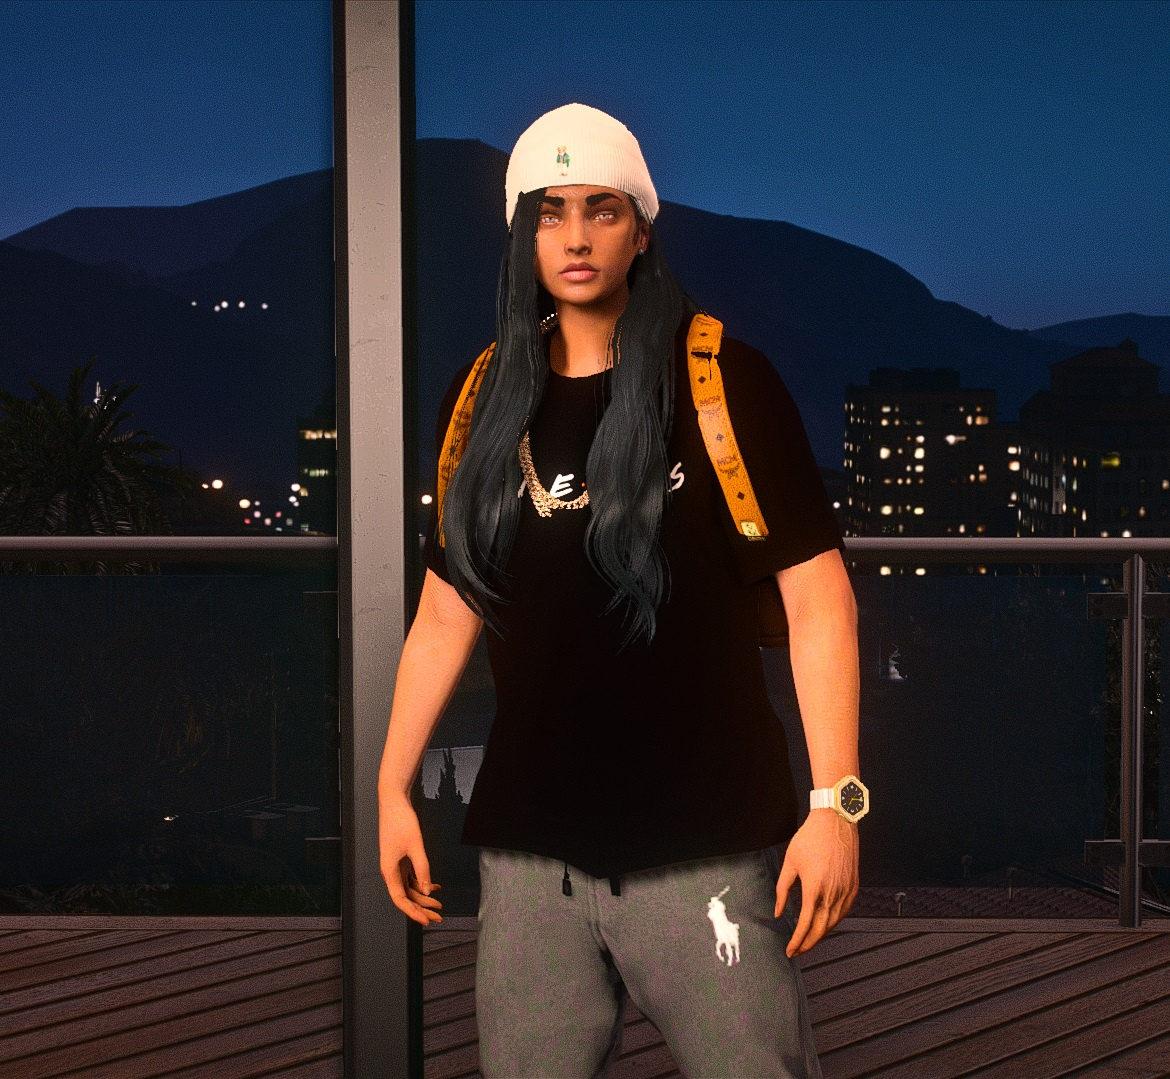 Beanie Louis Vuittons - GTA 5 mods - review and installation of